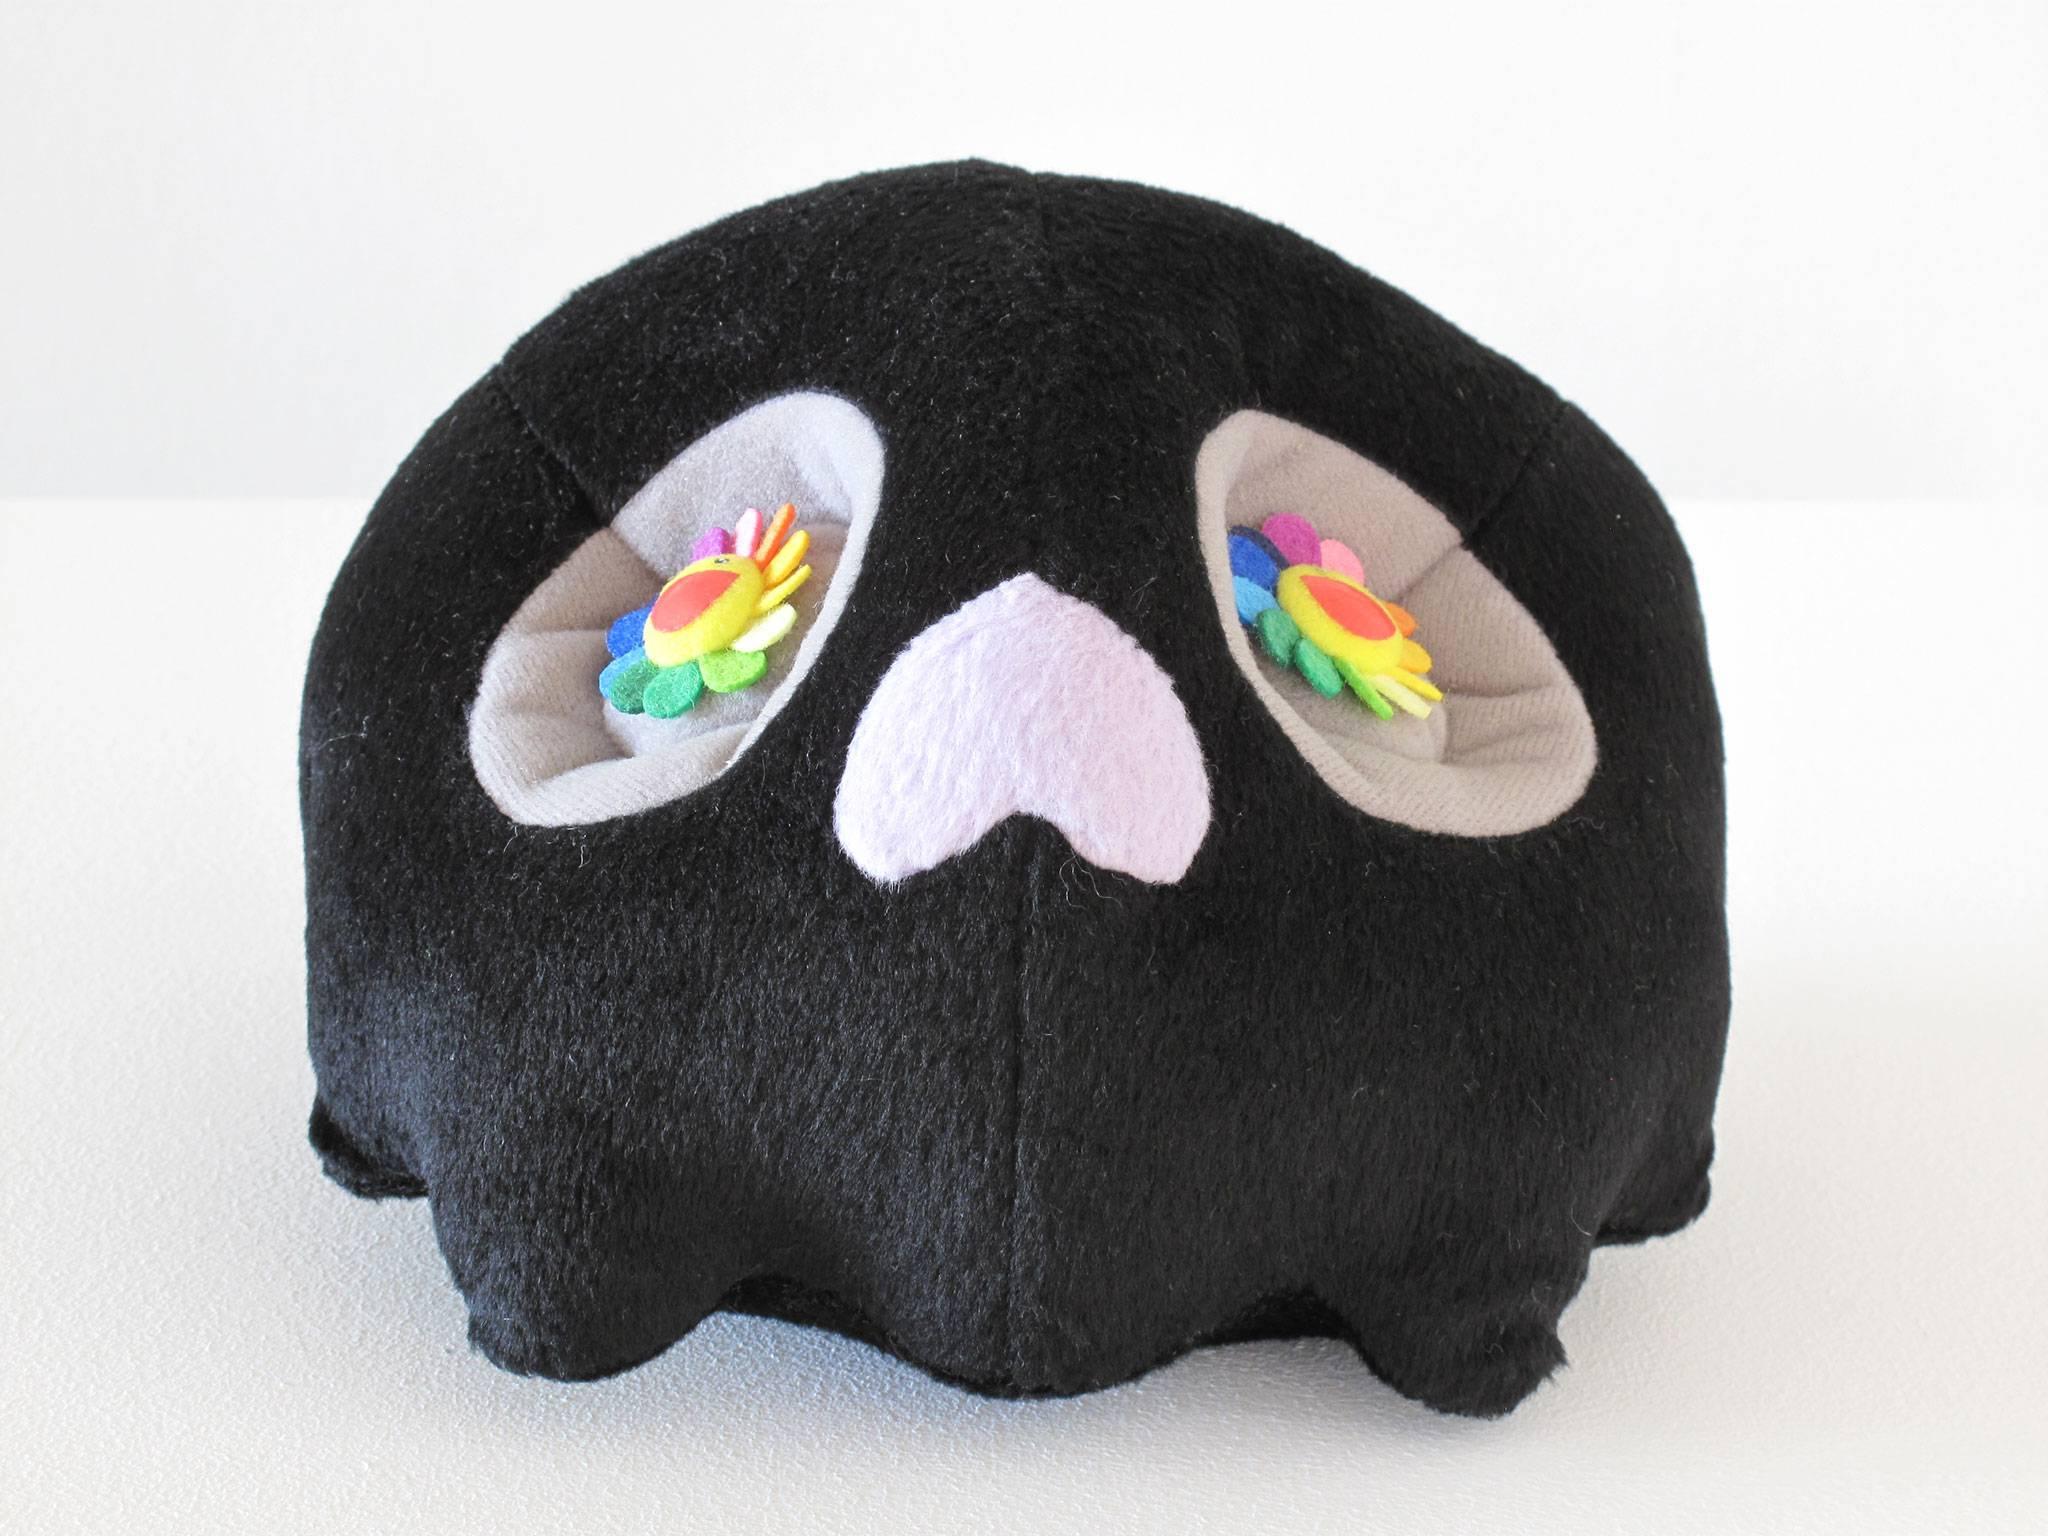 Takashi Murakami Soft Black Skull Sculpture, 2007 In Excellent Condition For Sale In Los Angeles, CA